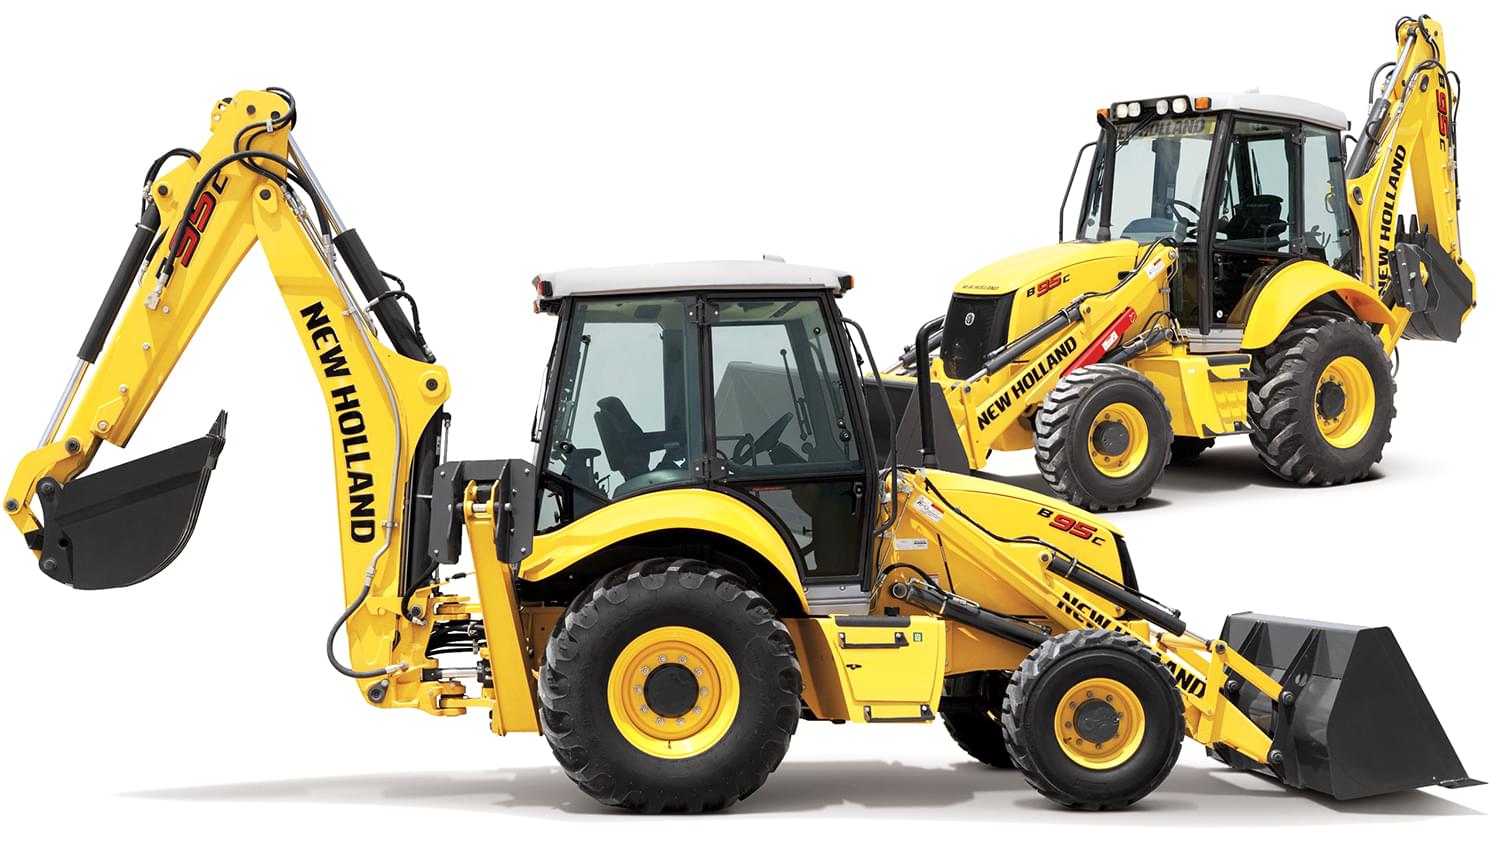 Product labeling for heavy equipment